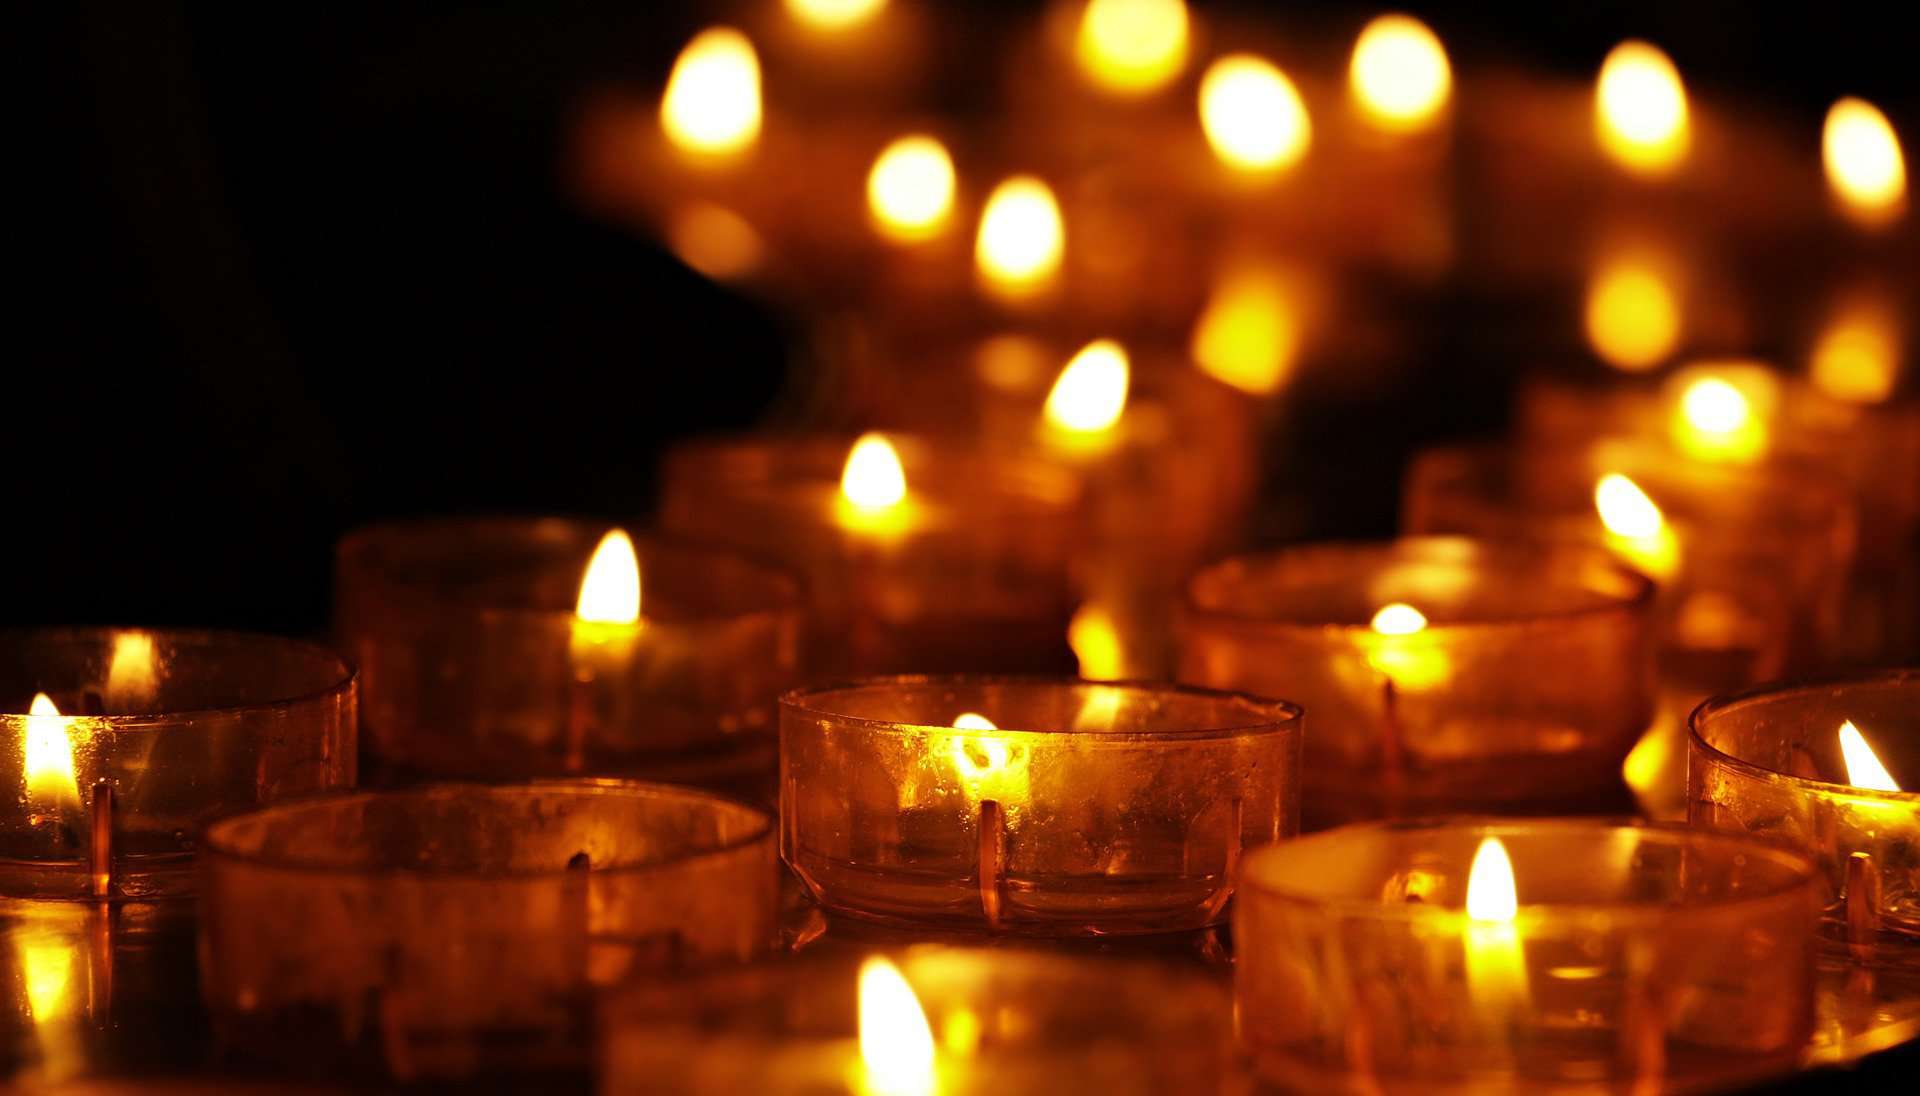 A large group of candles in amber glass are lit in a dark space.